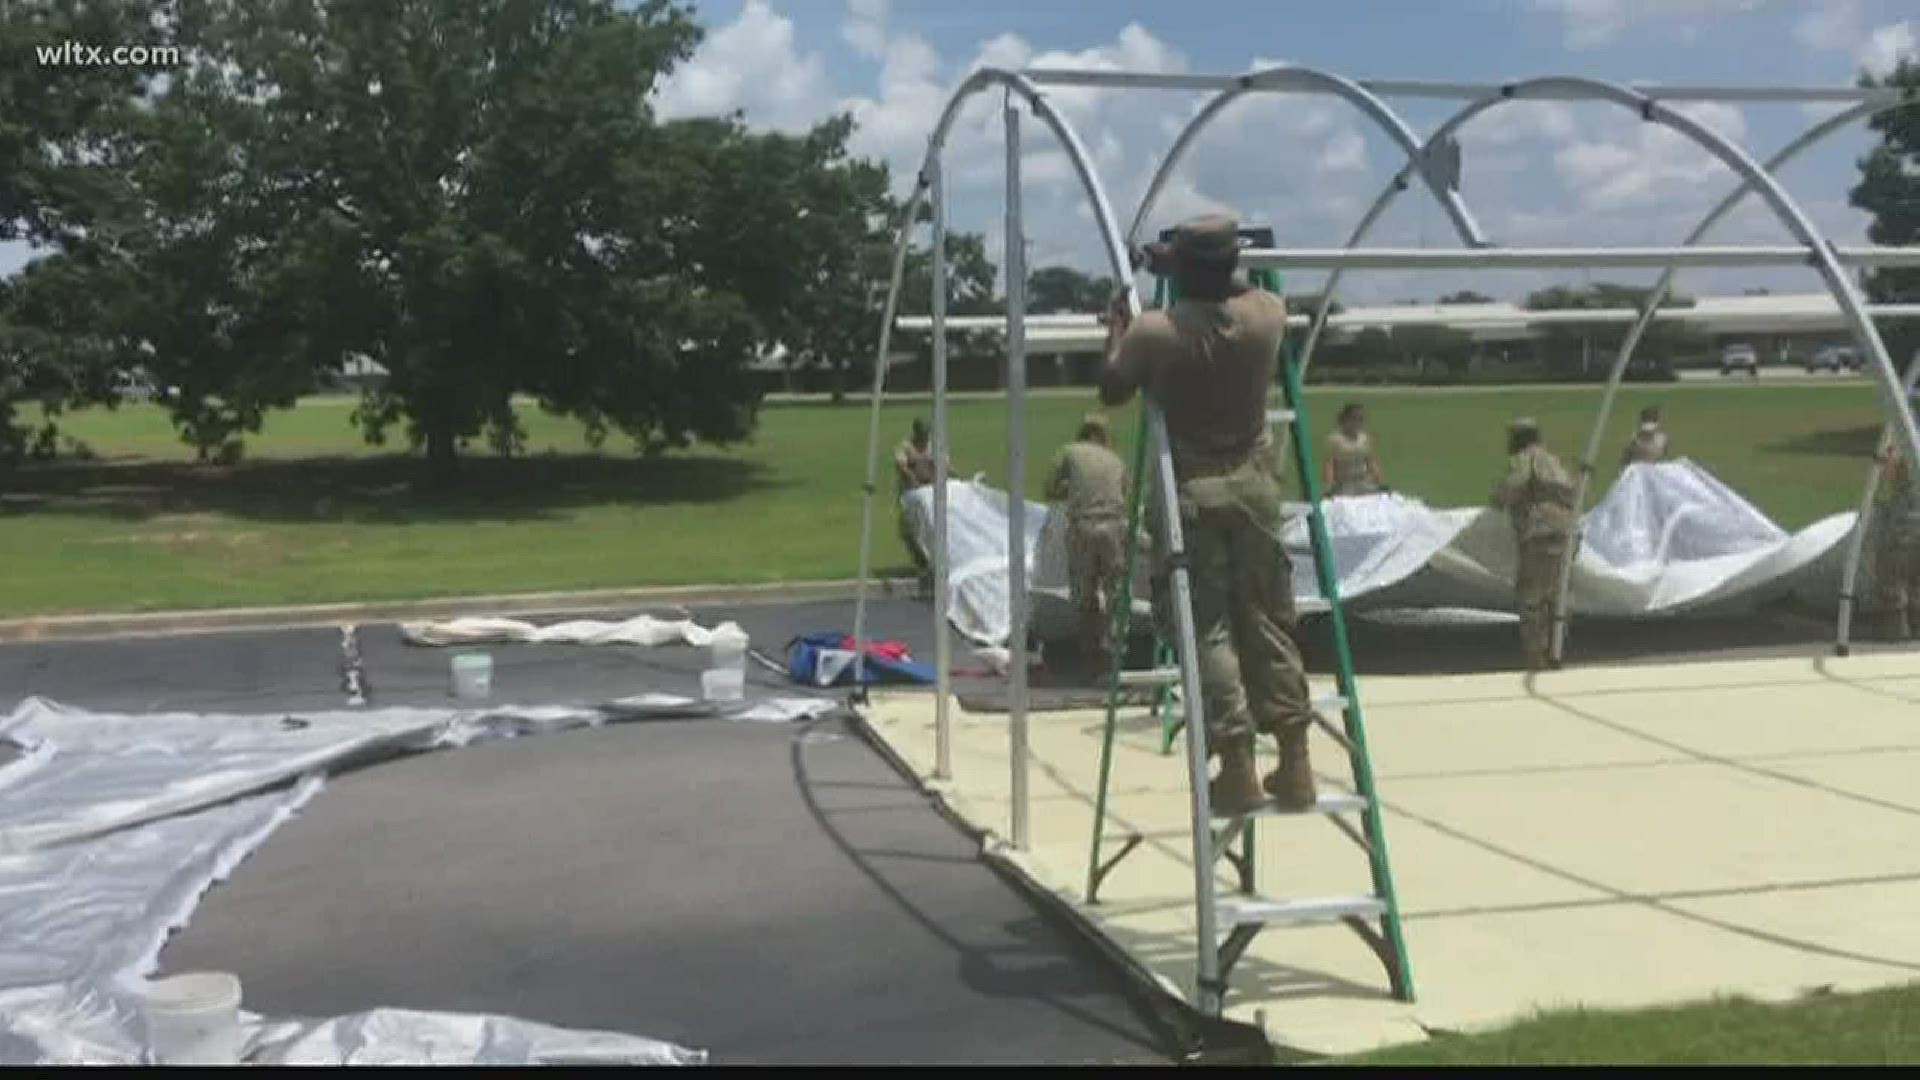 Since mid-March the SC National Guard has been helping by putting up temporary hospitals, giving out PPE and helping with testing.